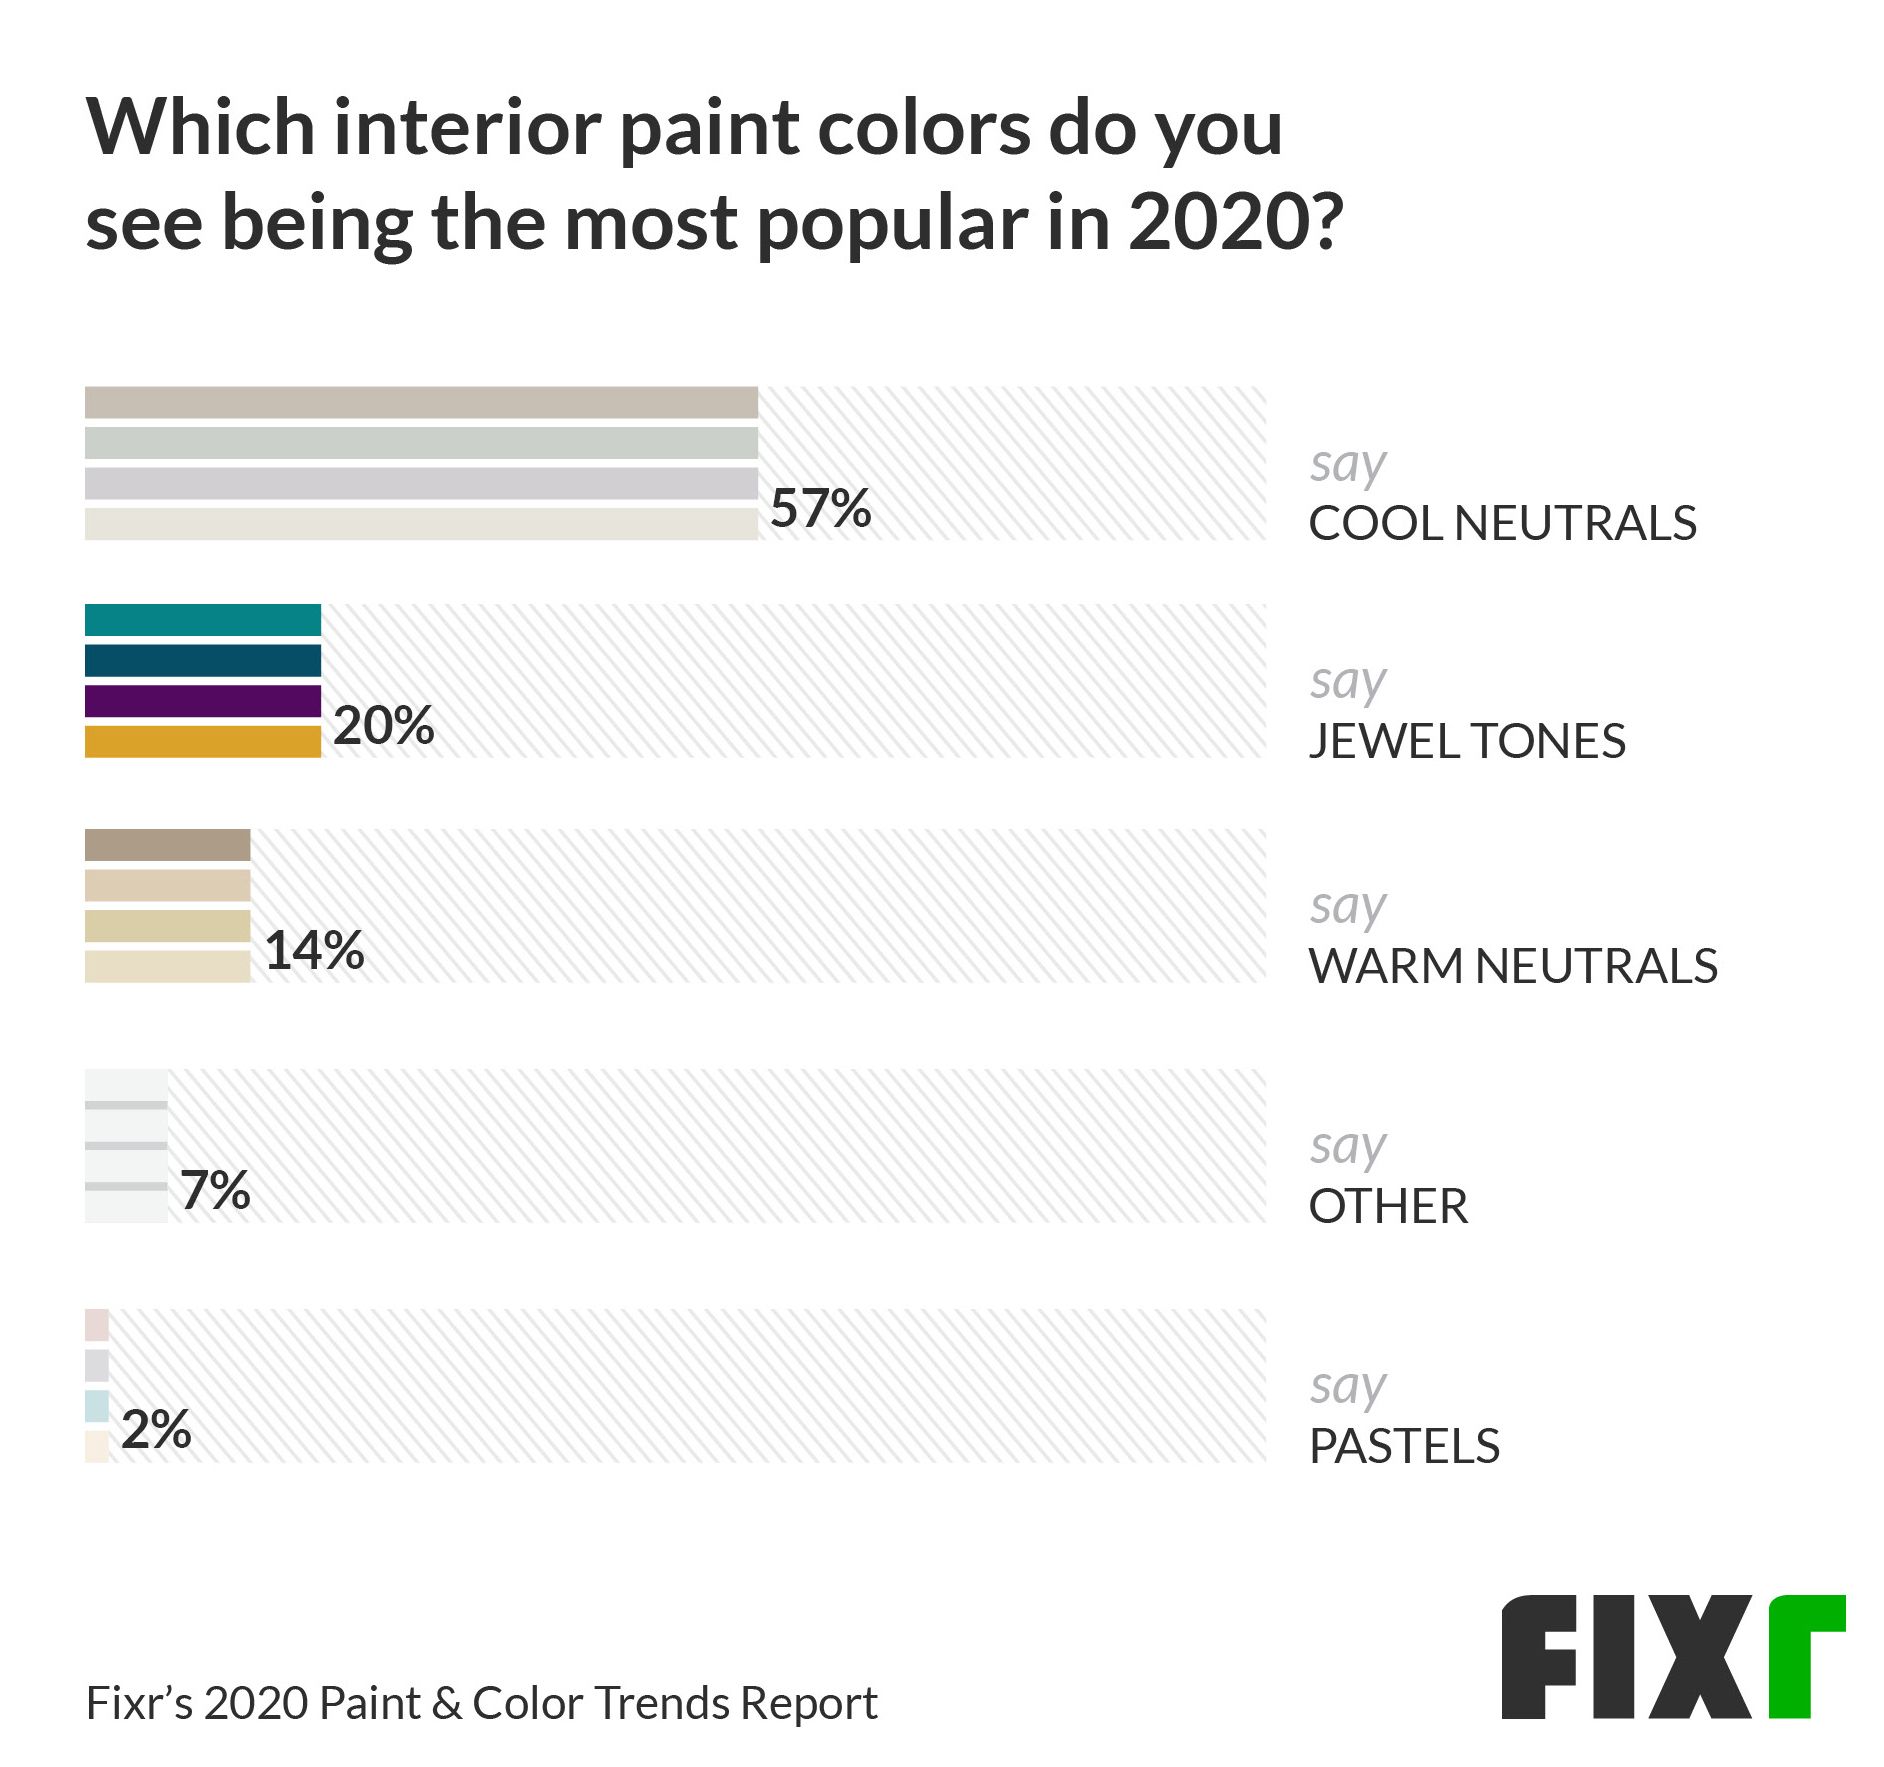 The most popular interior paint colors in 2020